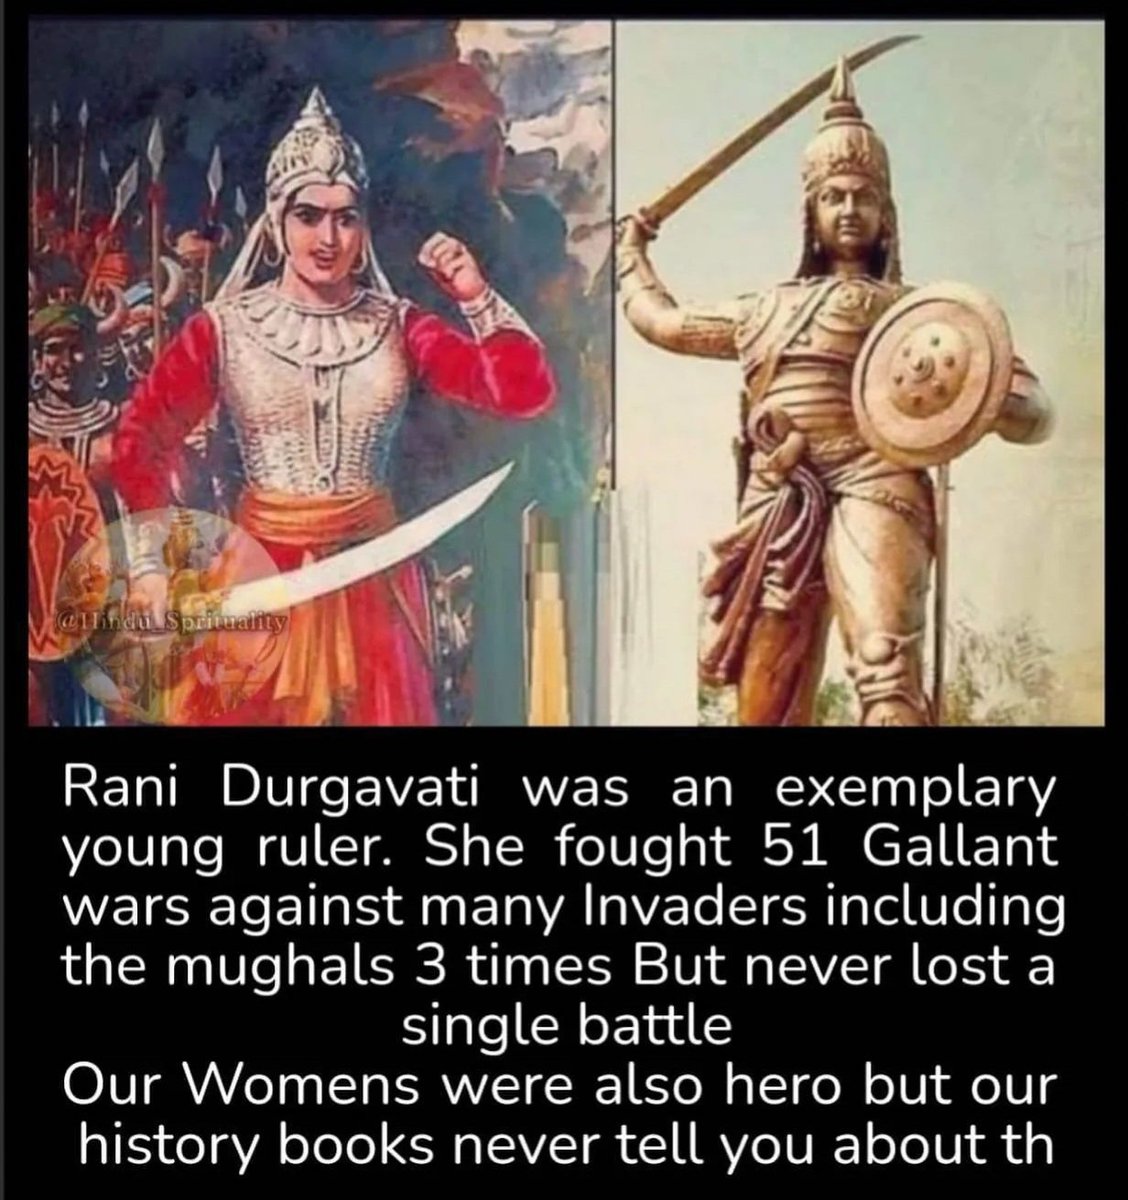 The Untold History 🚩🚩